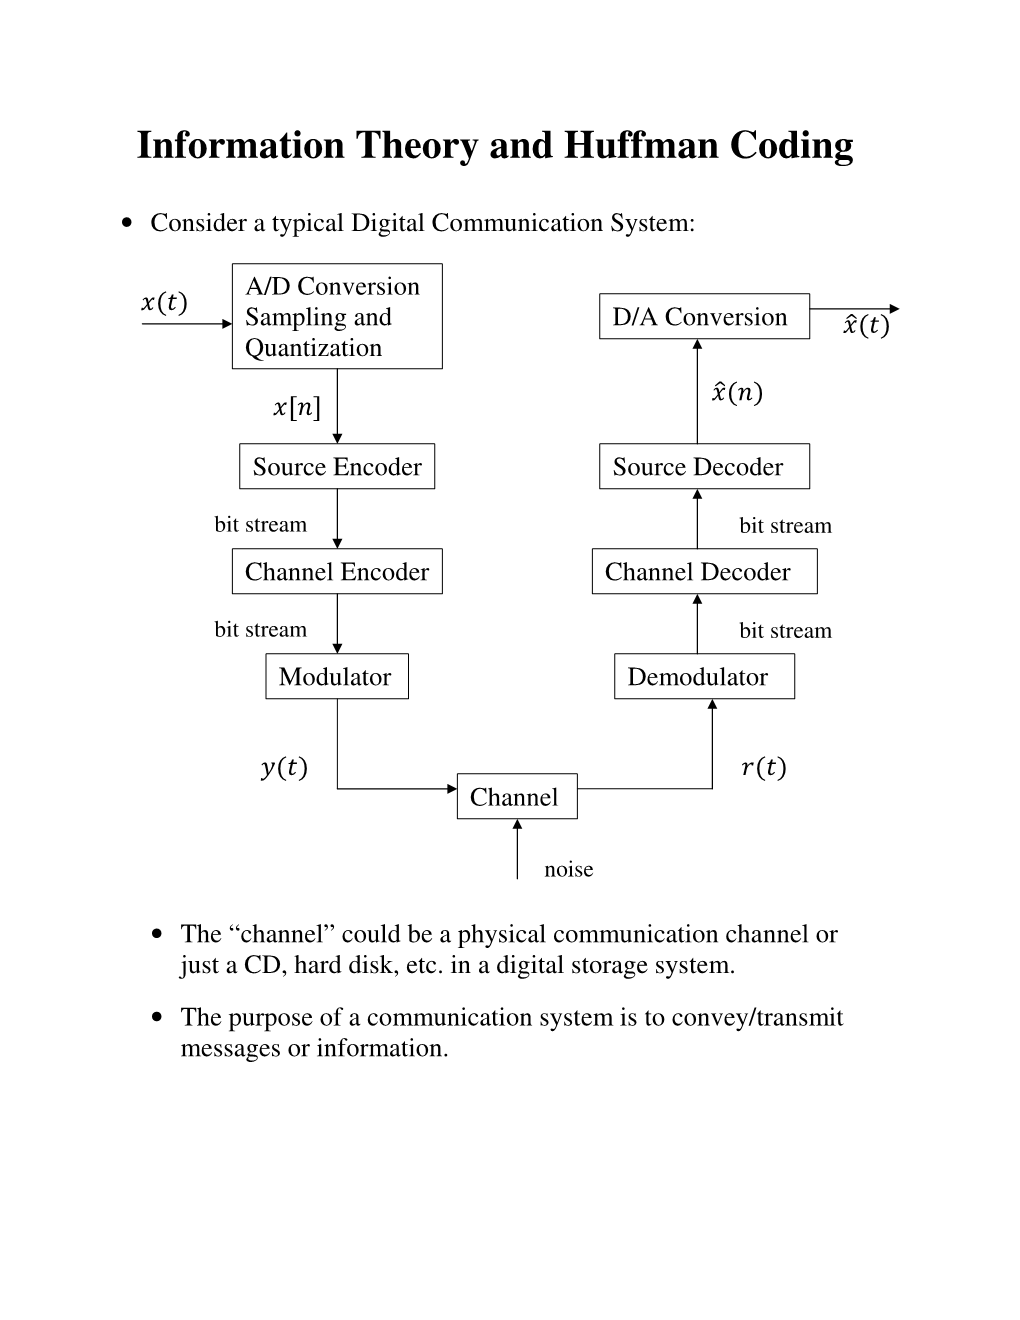 Information Theory and Huffman Coding